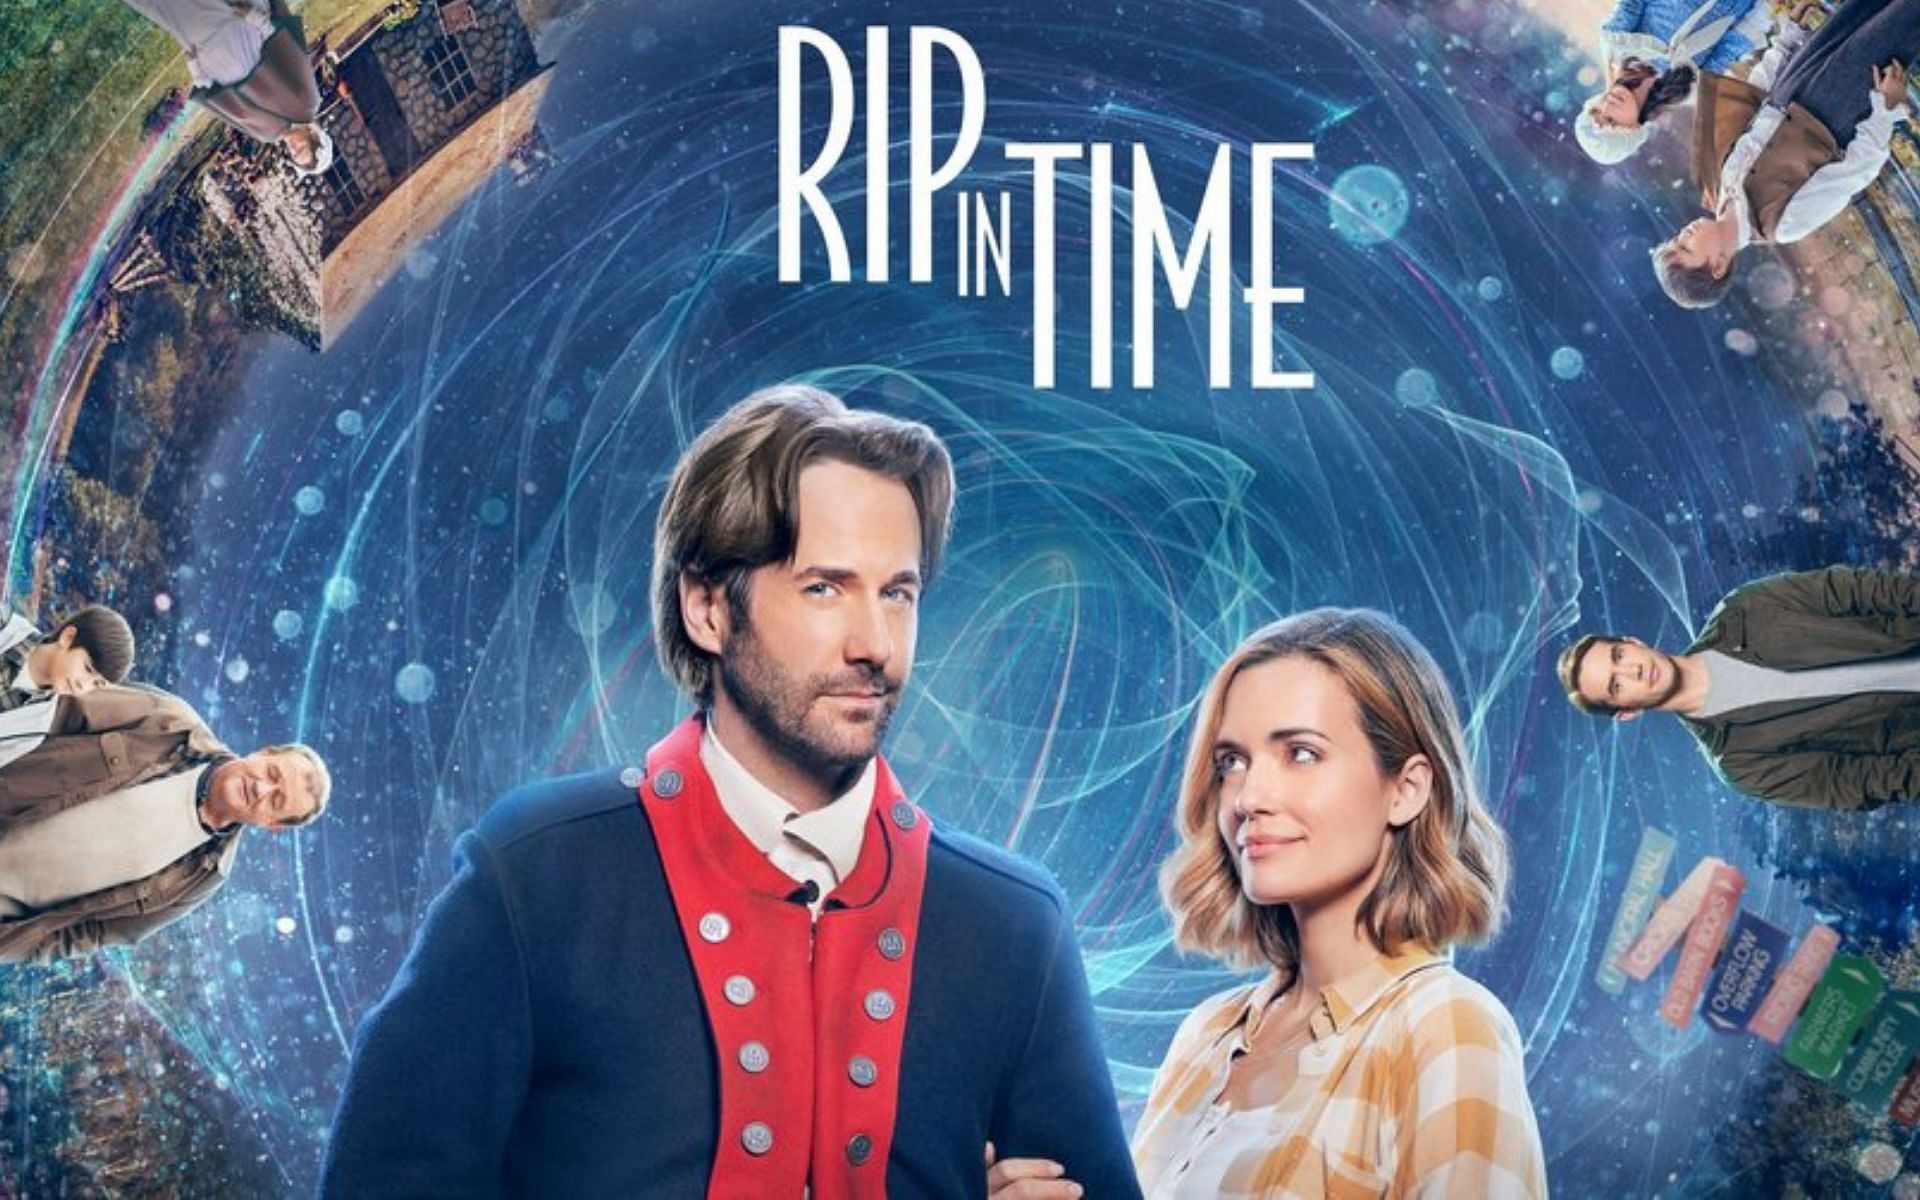 Rip in Time full cast list Chicago Med star Torrey DeVitto, Niall